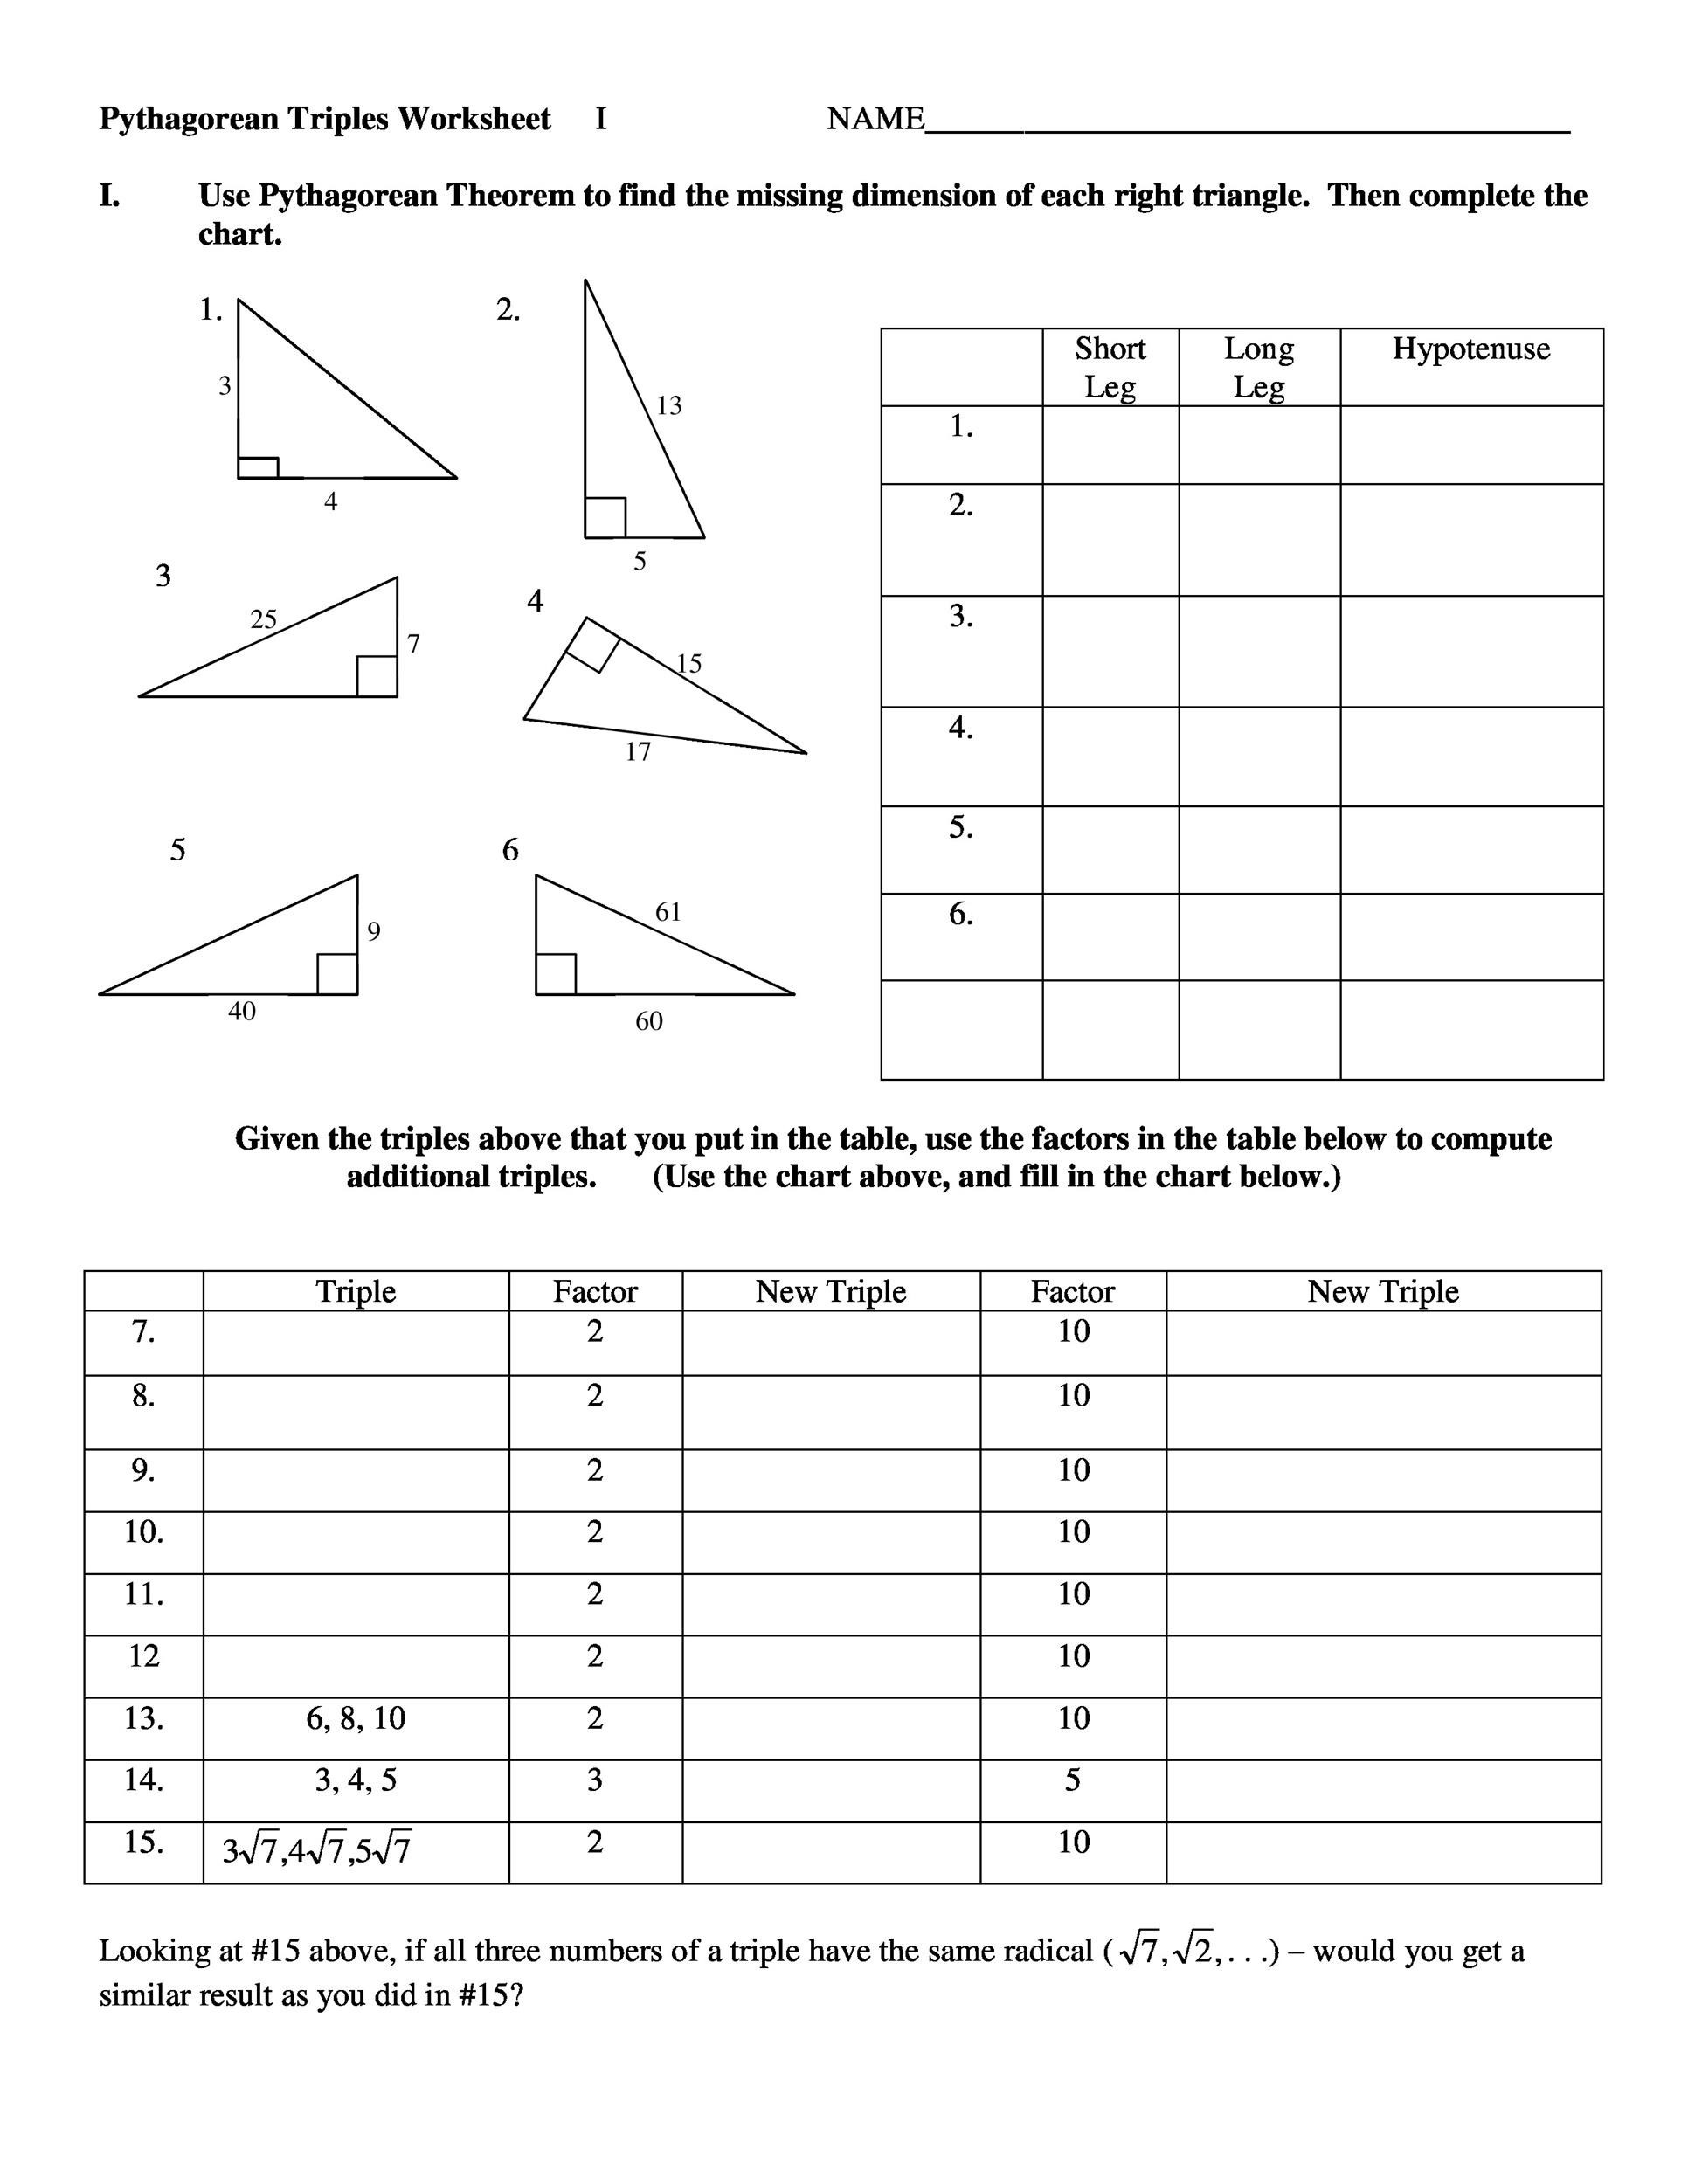 41-pythagorean-theorem-worksheet-with-answers-worksheet-for-fun